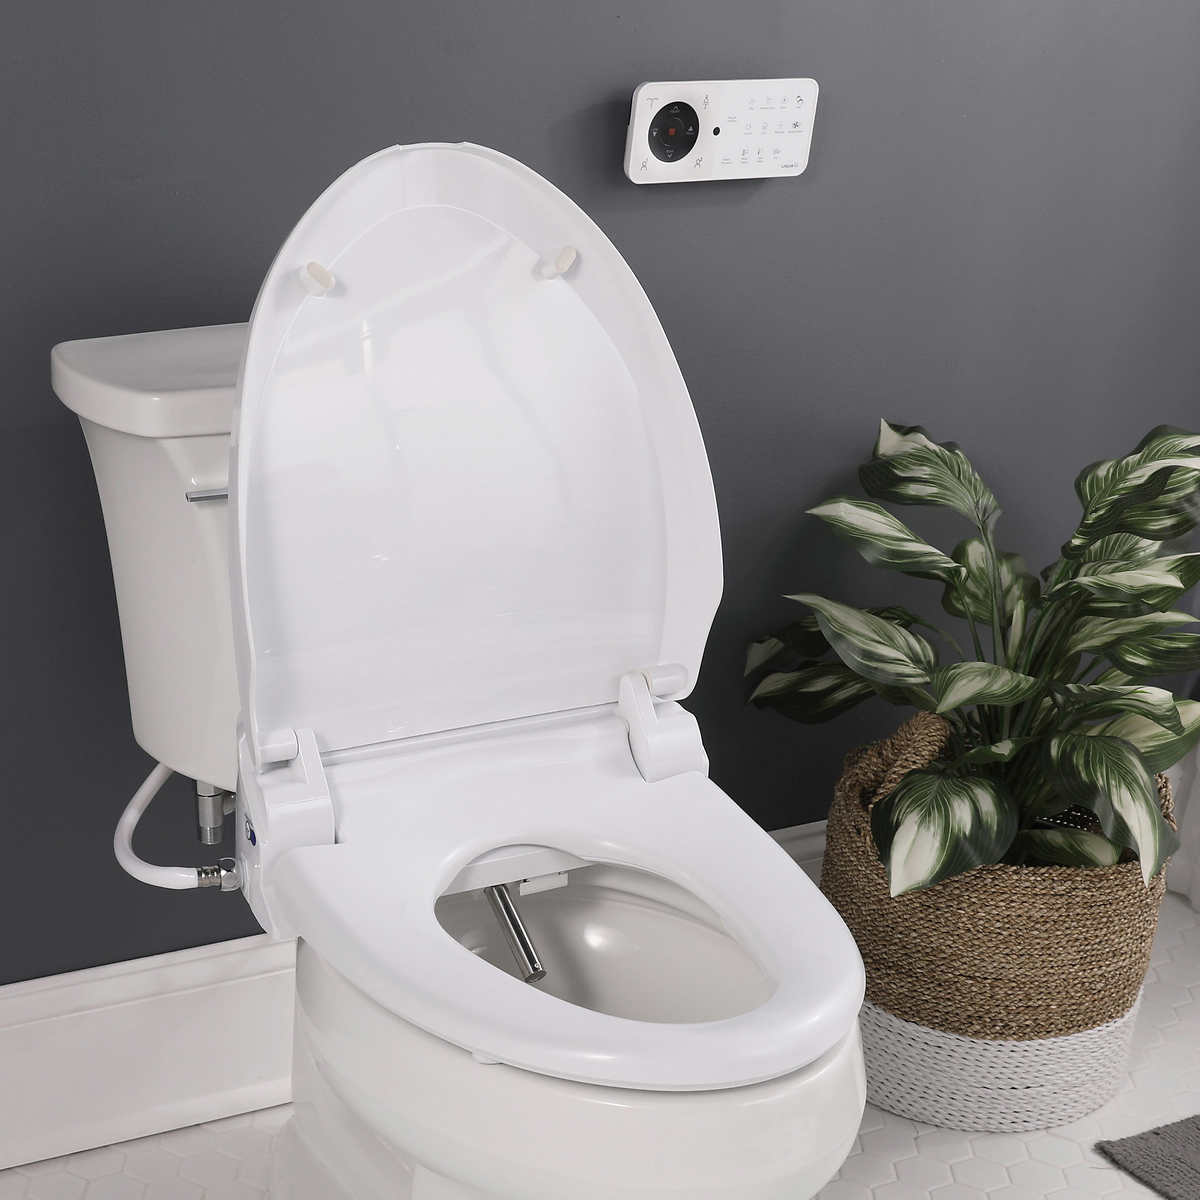 Bio bidet on sale at costco $220 and $300. Expotes 8/28.